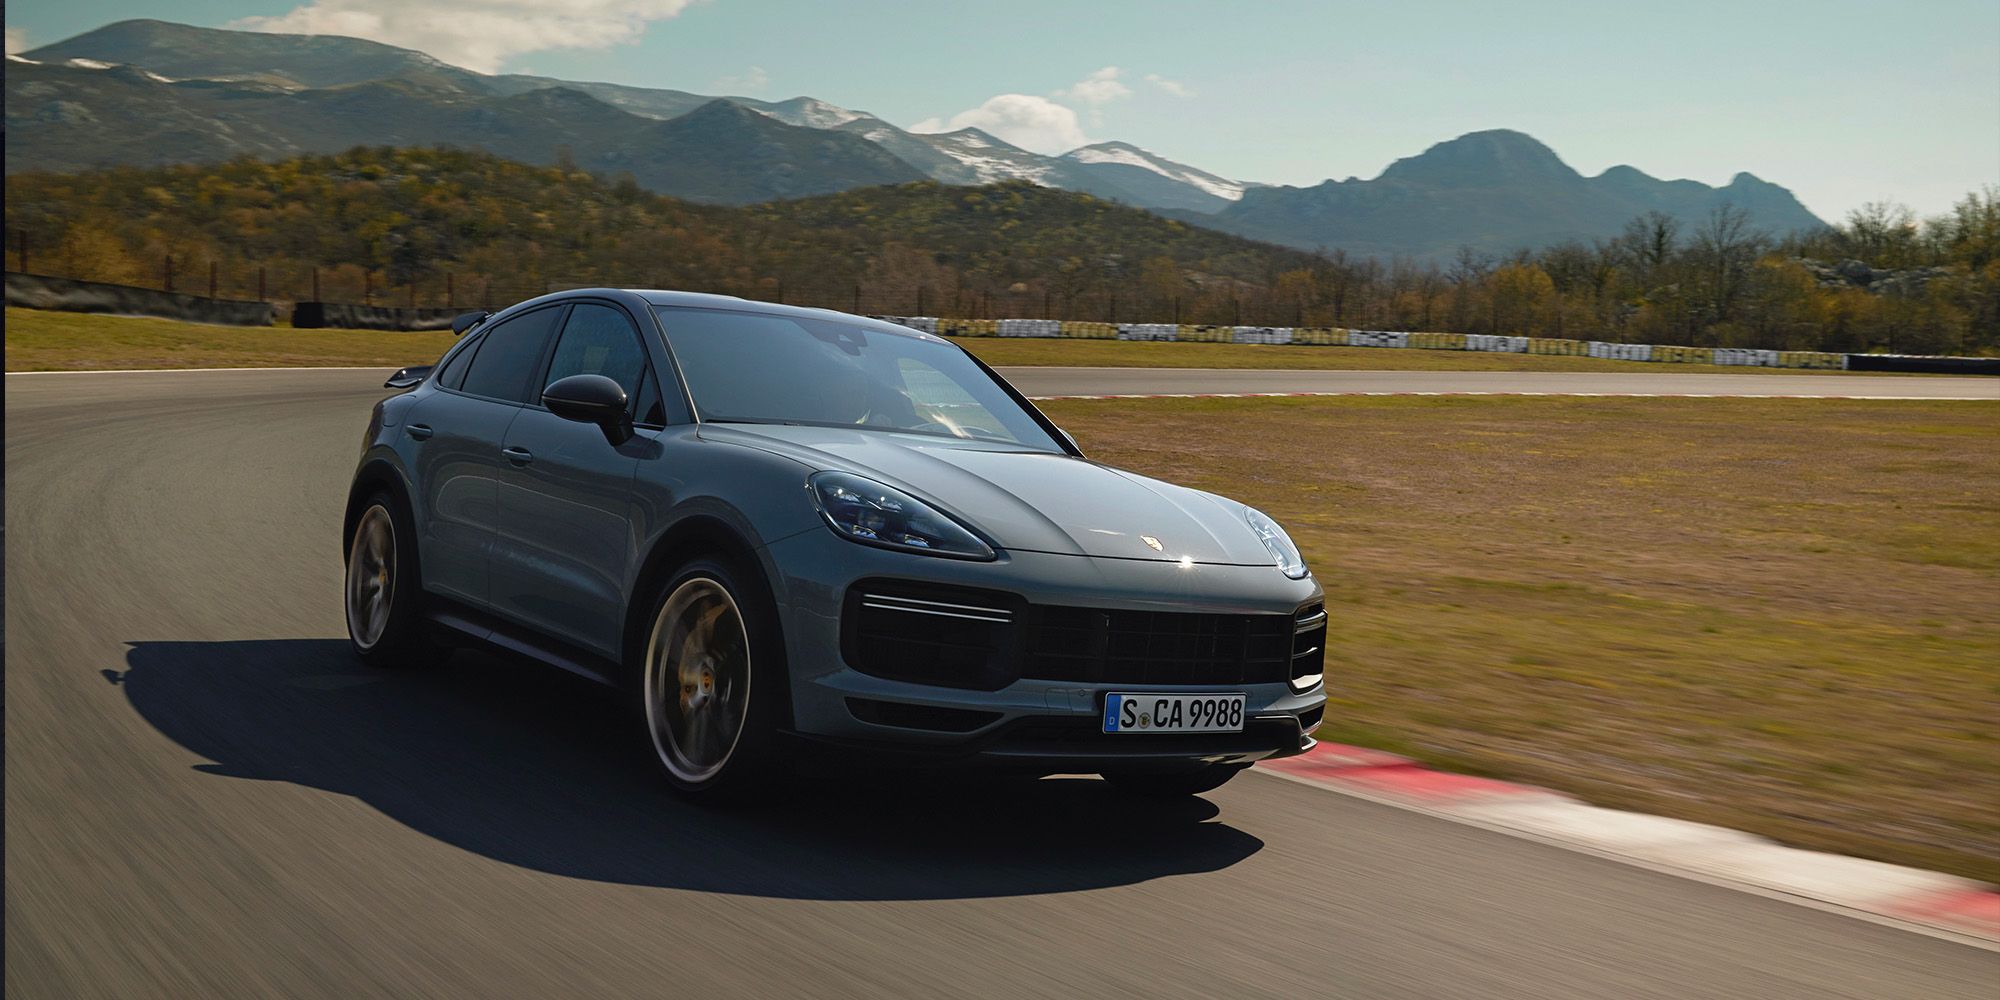 The front of a Cayenne Turbo GT on track